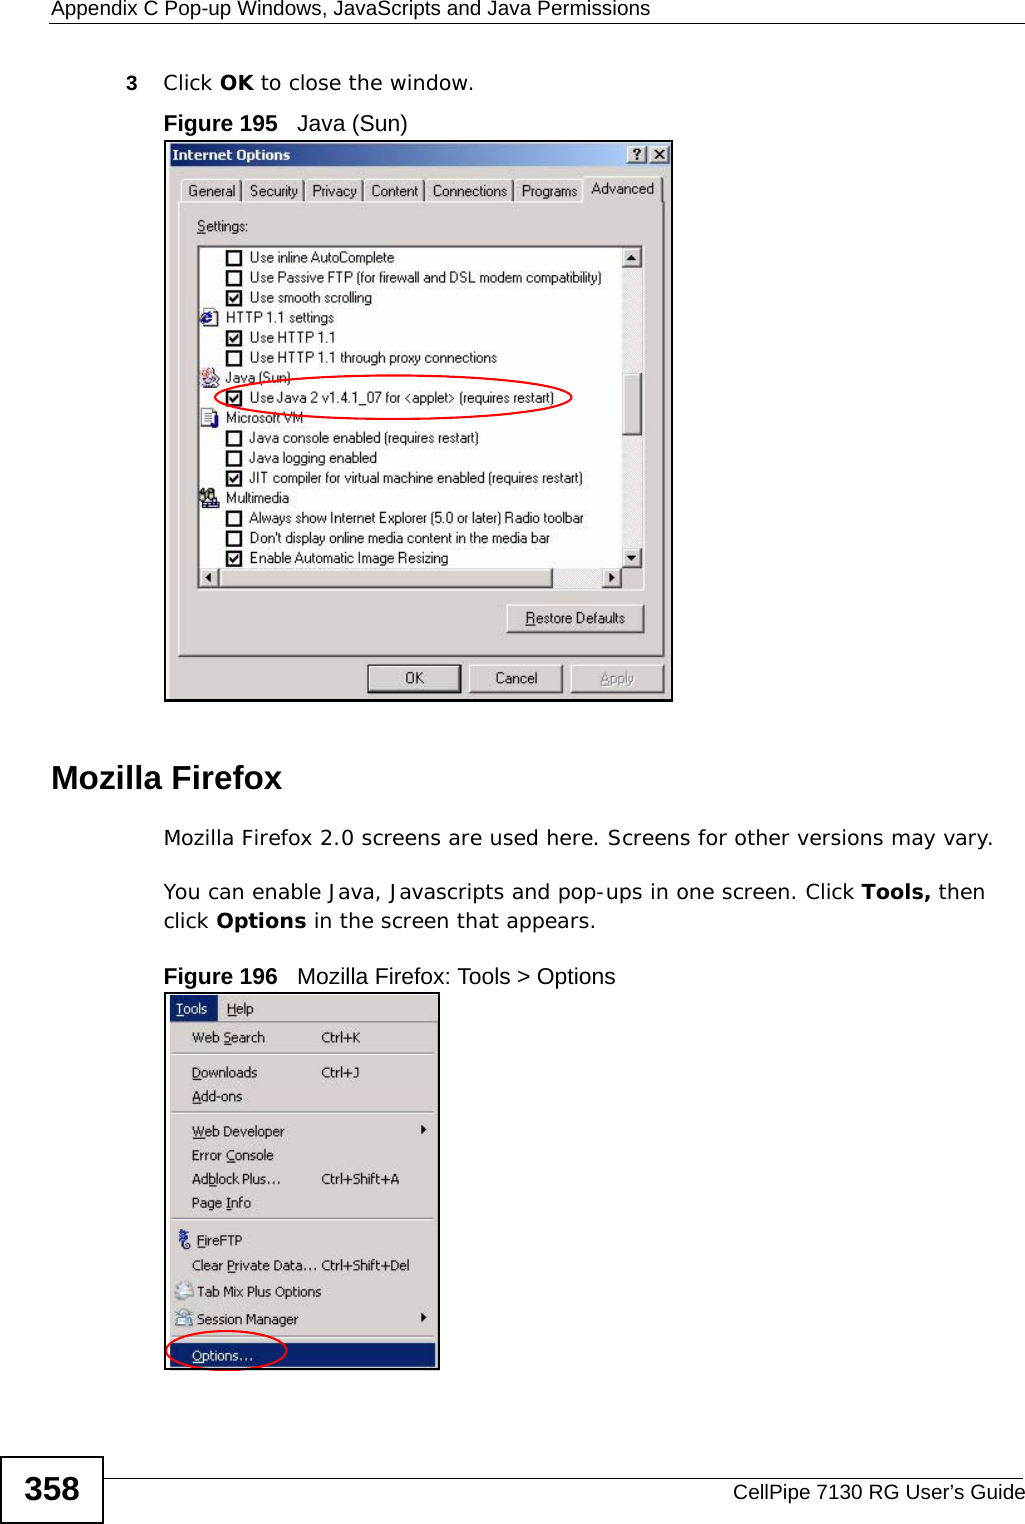 Appendix C Pop-up Windows, JavaScripts and Java PermissionsCellPipe 7130 RG User’s Guide3583Click OK to close the window.Figure 195   Java (Sun)Mozilla FirefoxMozilla Firefox 2.0 screens are used here. Screens for other versions may vary. You can enable Java, Javascripts and pop-ups in one screen. Click Tools, then click Options in the screen that appears.Figure 196   Mozilla Firefox: Tools &gt; Options